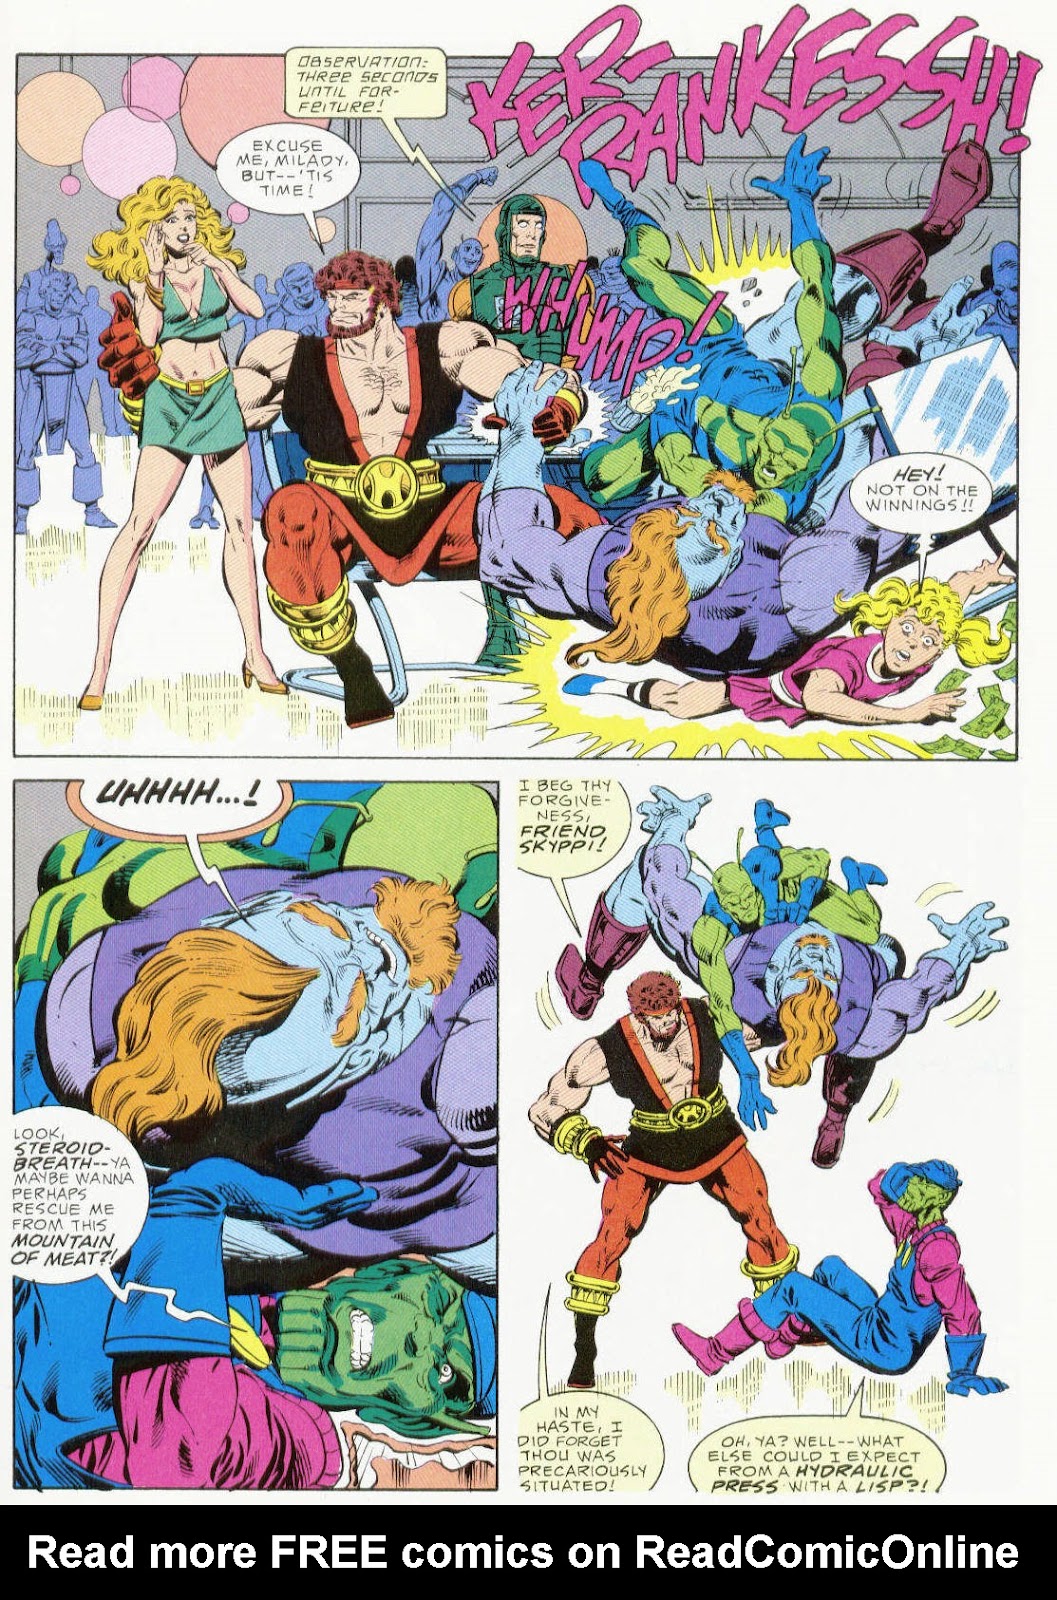 Marvel Graphic Novel issue 37 - Hercules Prince of Power - Full Circle - Page 17